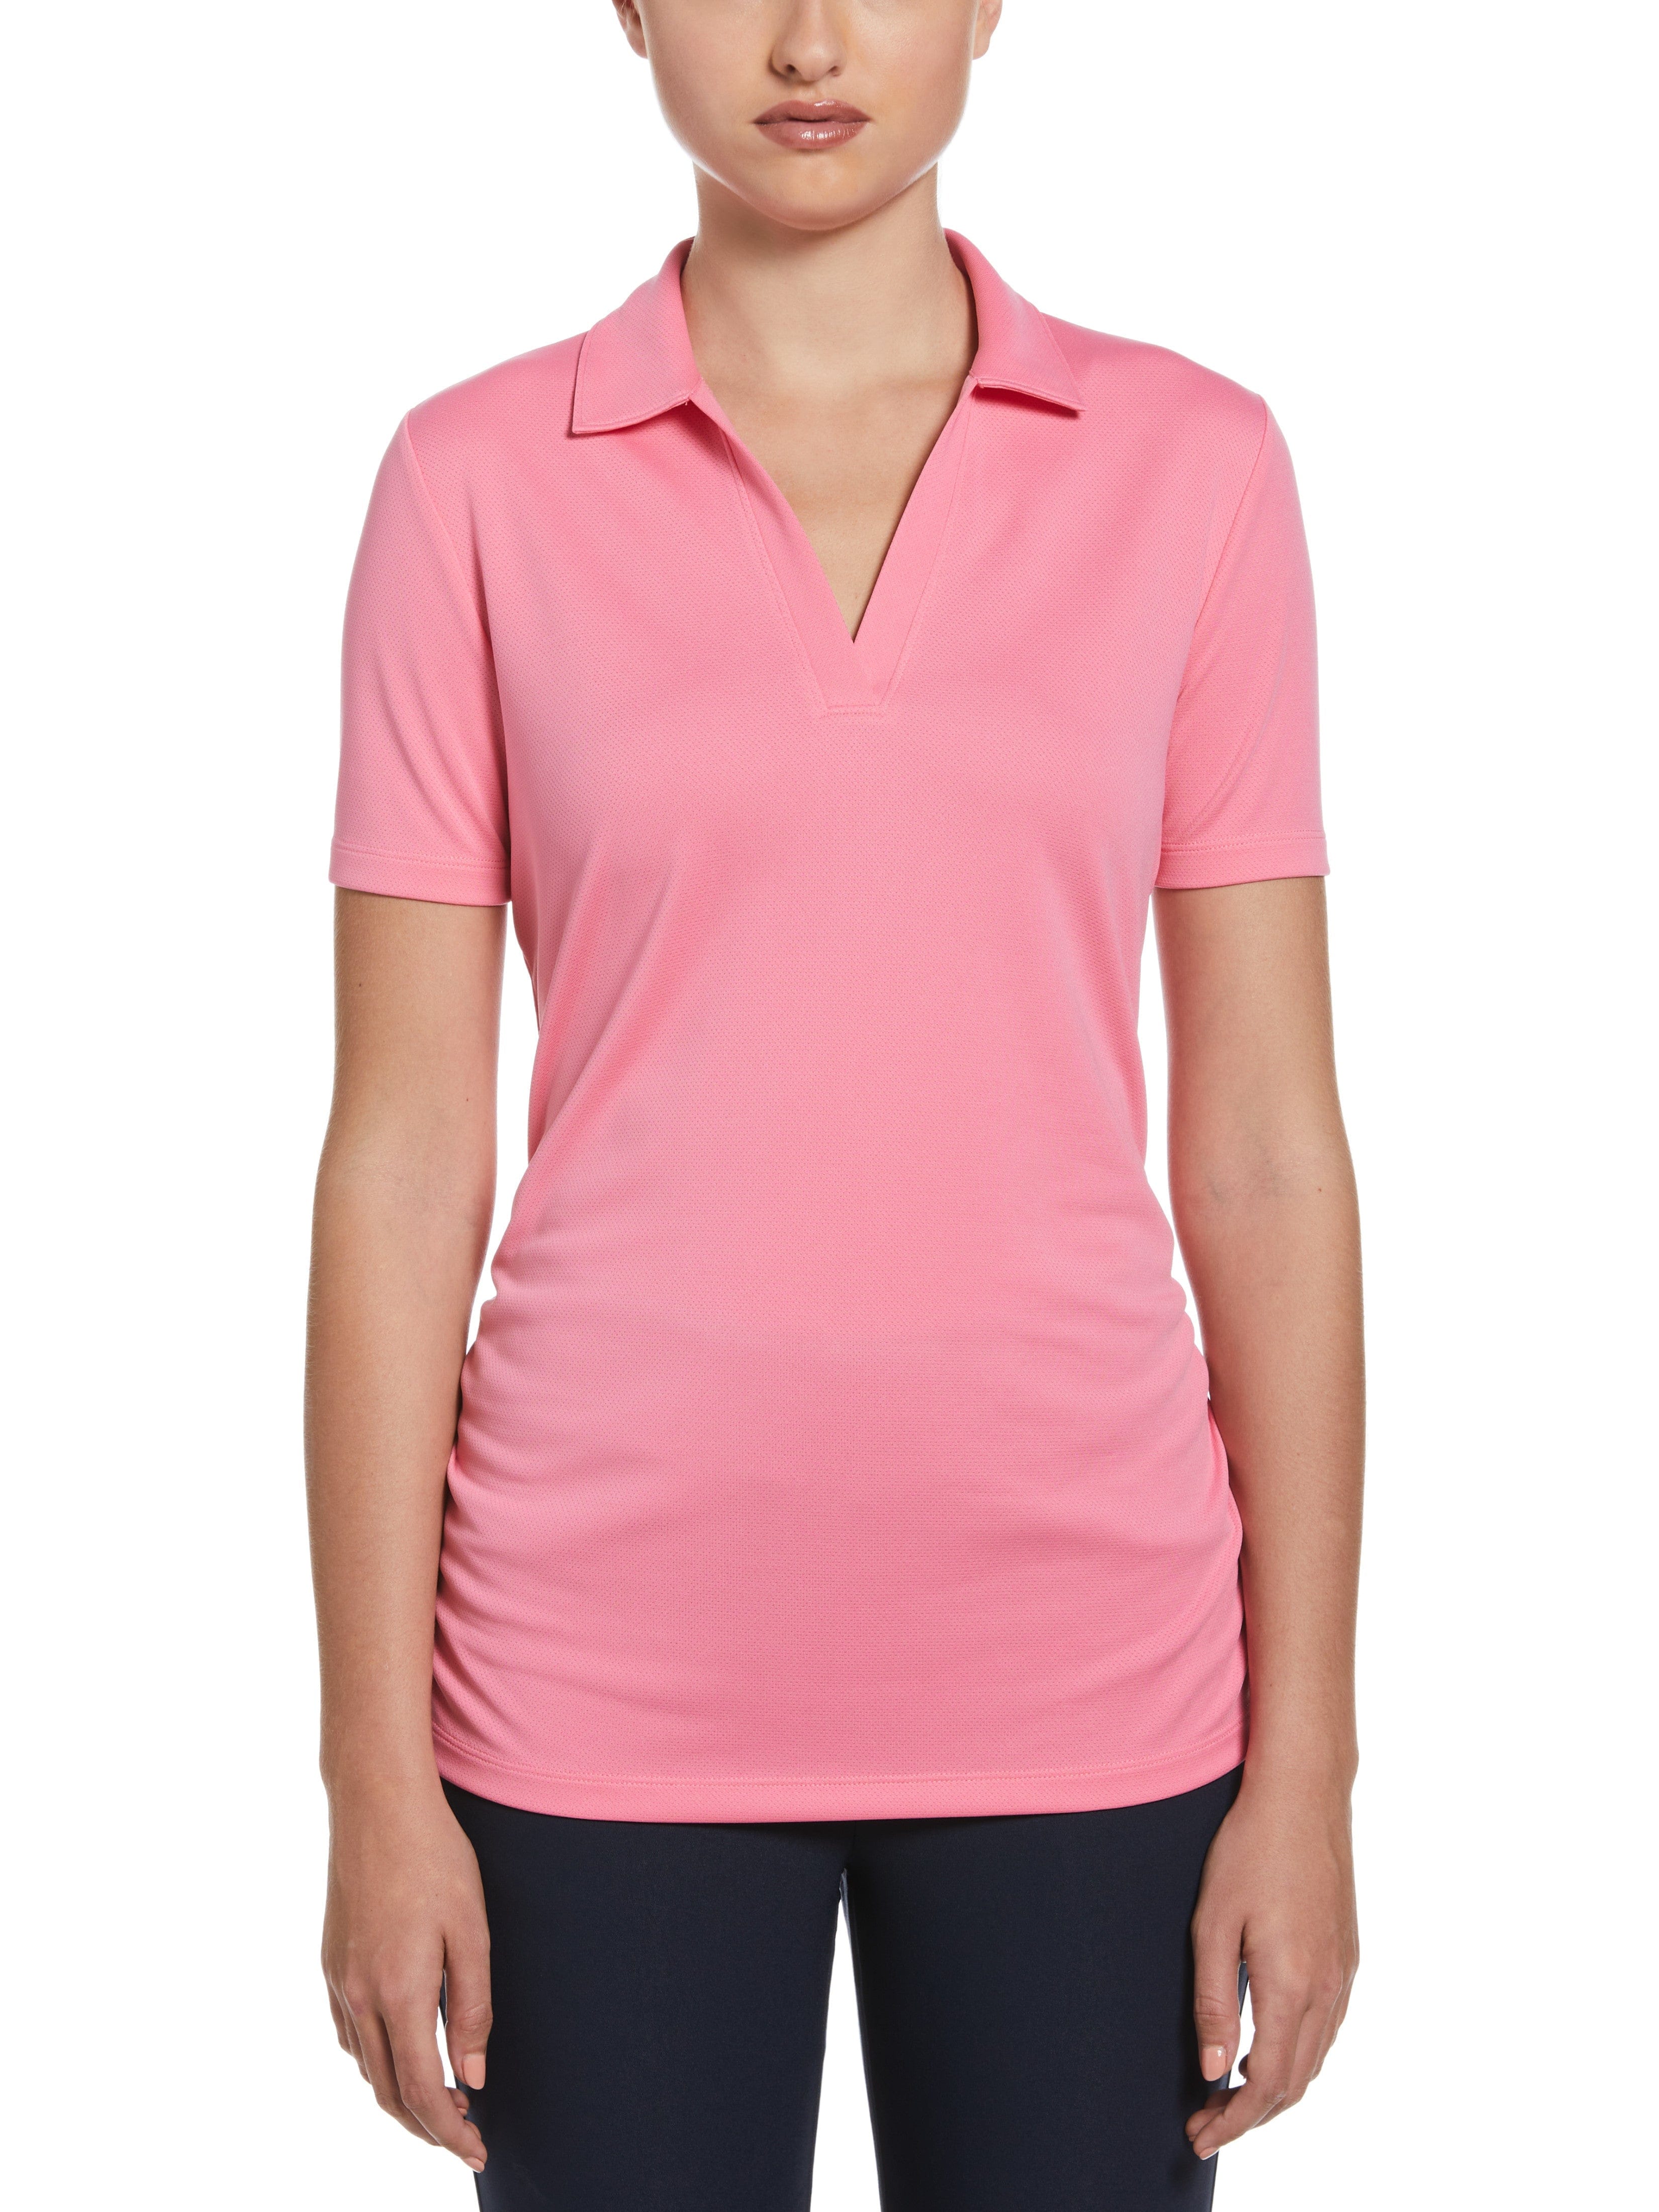 PGA TOUR Apparel Womens AirFlux™ Solid Golf Polo Shirt, Size Medium, Flowering Ginger Pink, 100% Polyester | Golf Apparel Shop